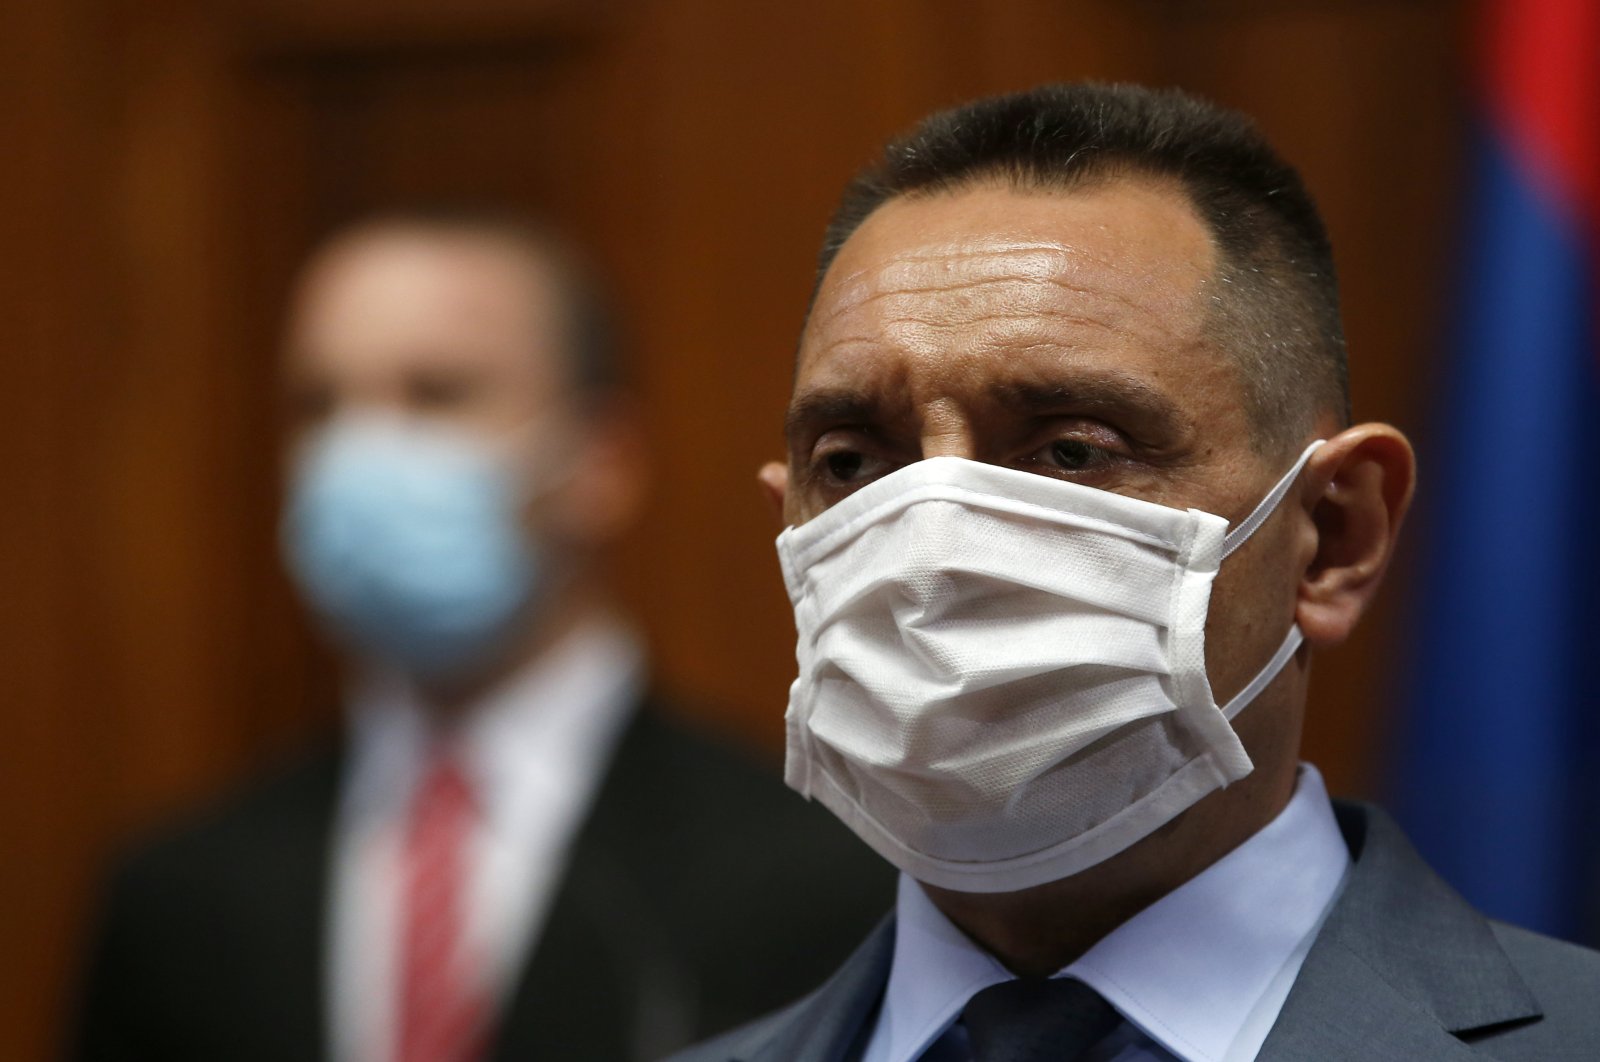 On April 28, 2020. file photo, Serbia Defense Minister Aleksandar Vulin wearing a mask to protect against coronavirus attends the session in Belgrade, Serbia. (AP Photo)